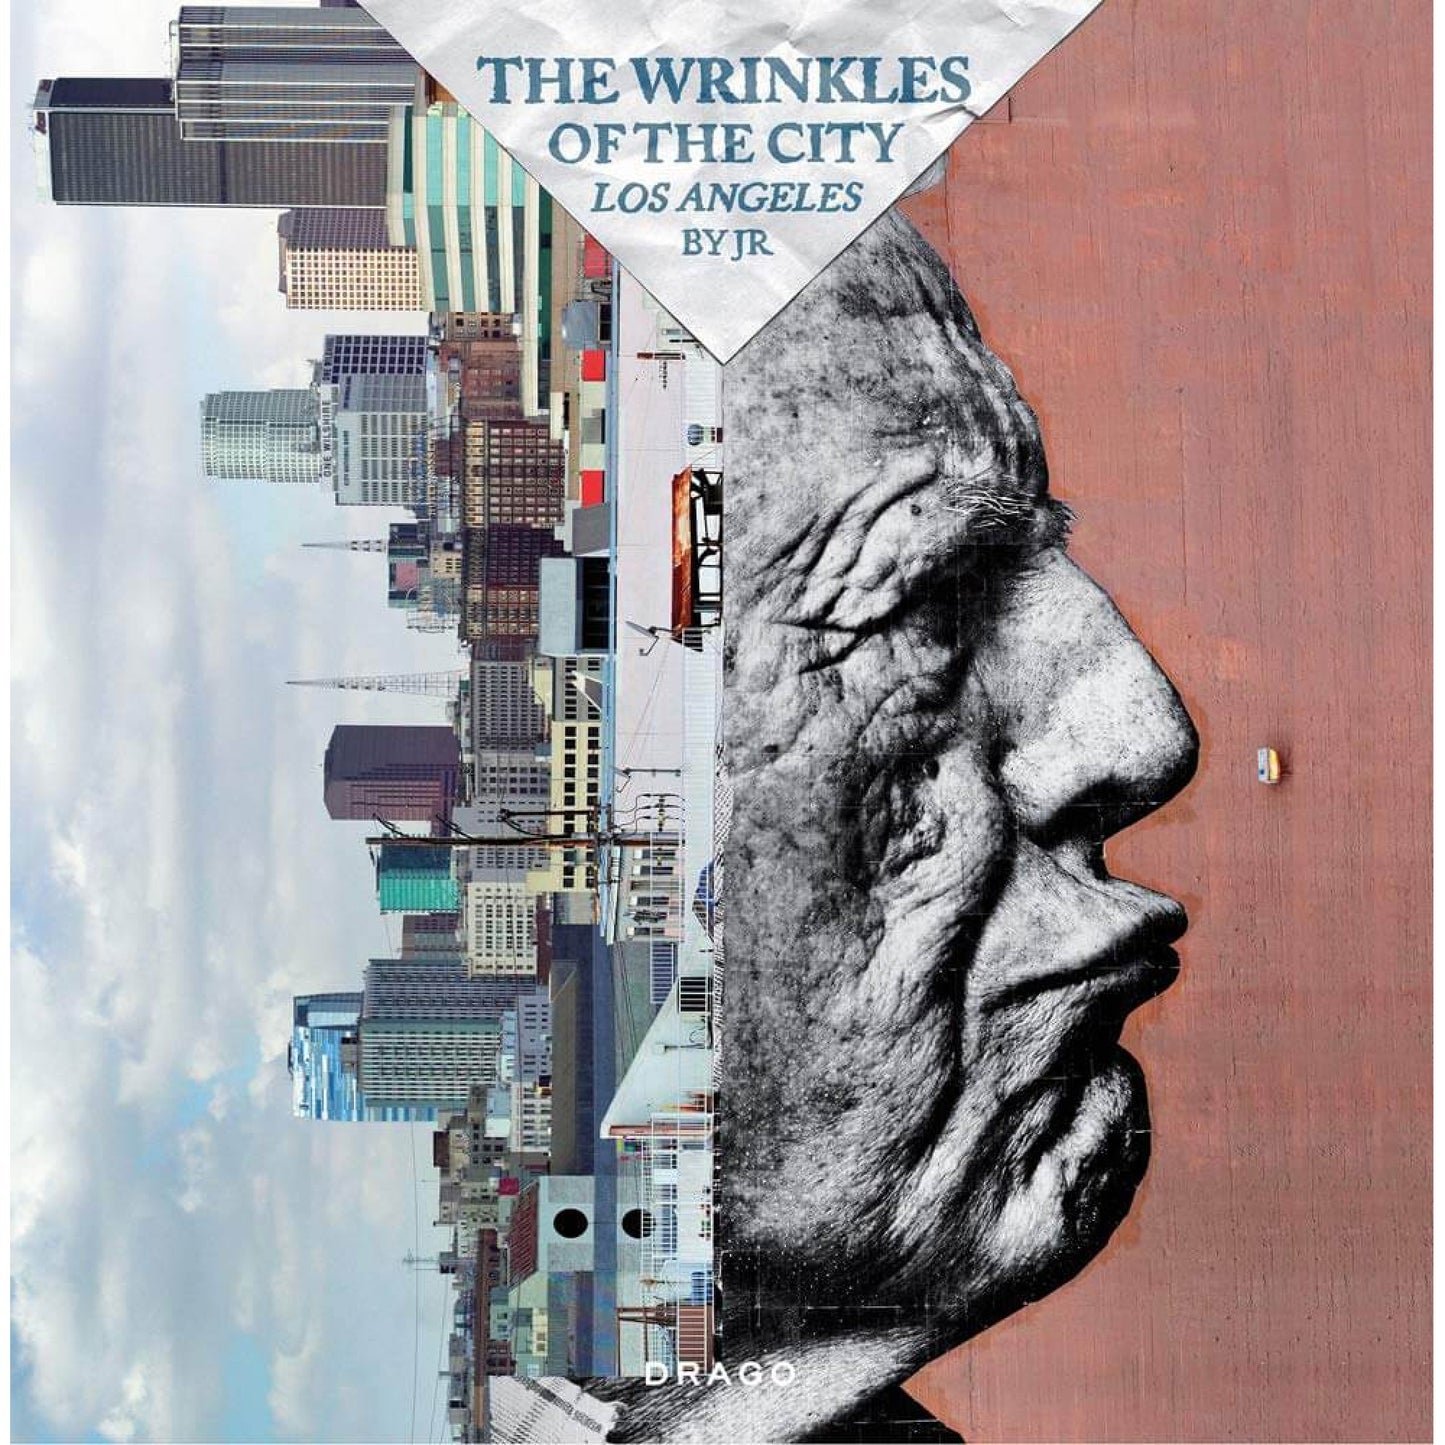 The Wrinkles of the City- Los Angeles